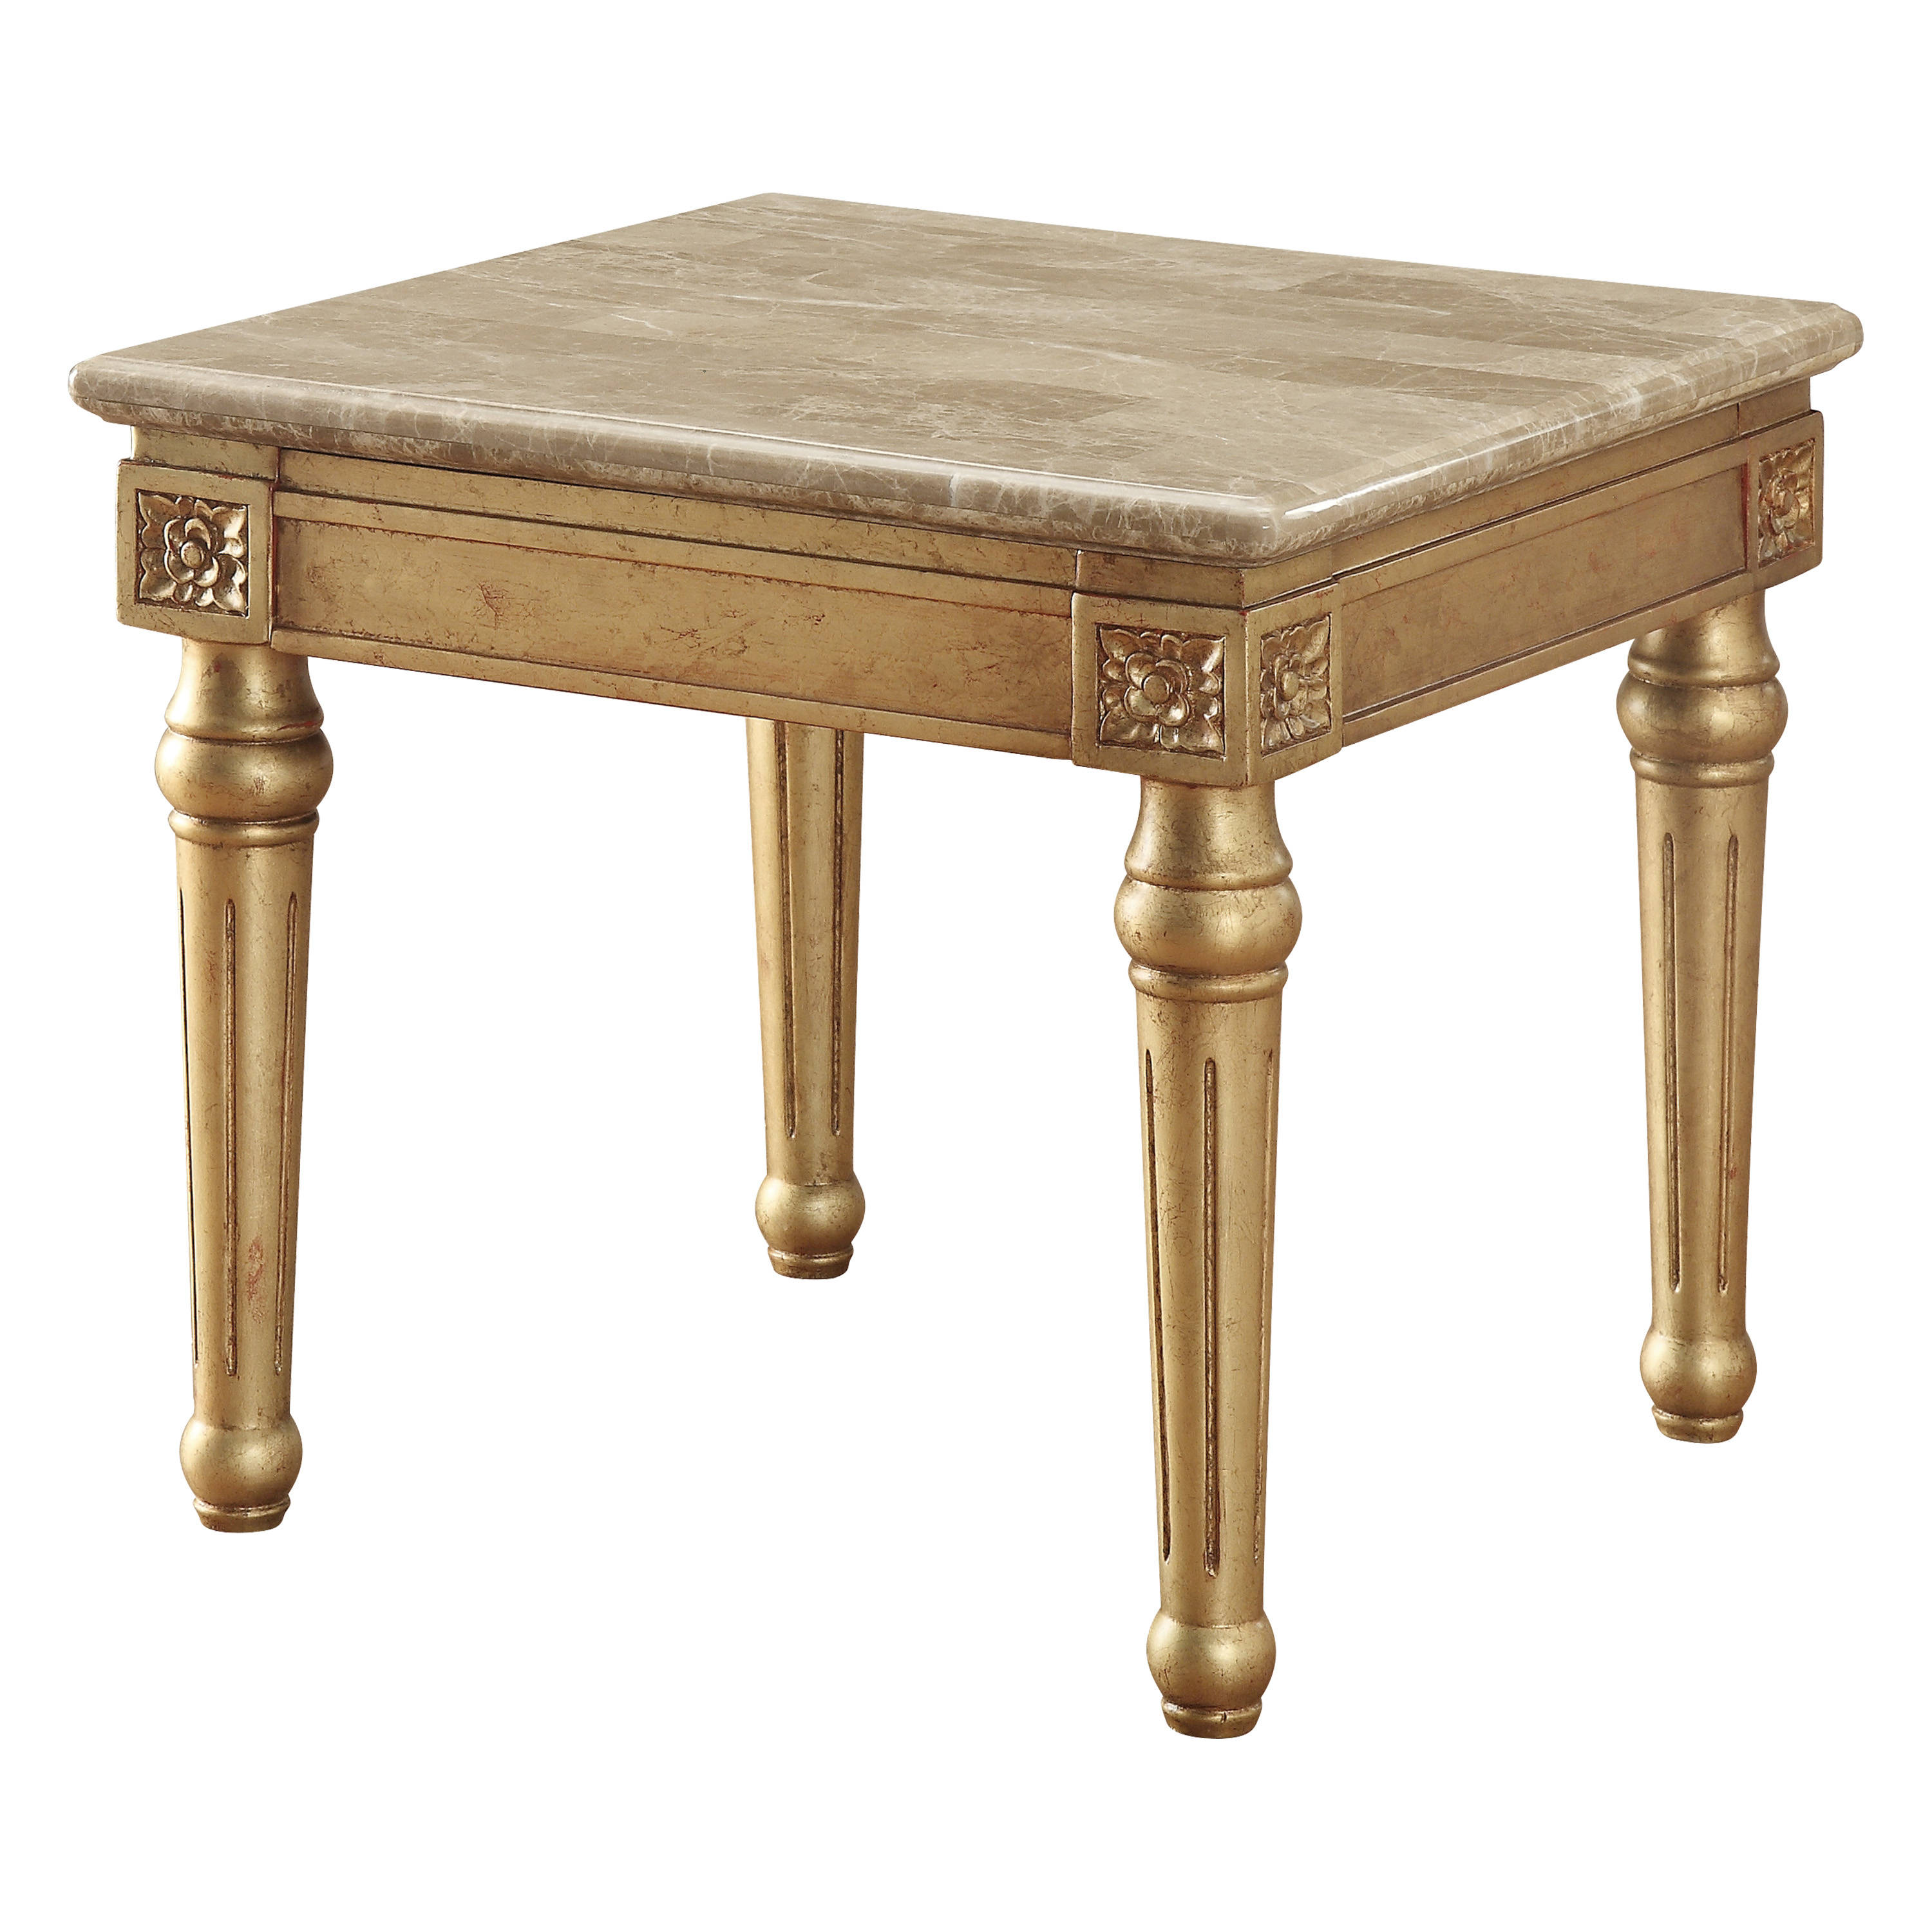 acme furniture daesha antique gold end table the classy home acm click enlarge white lamps for bedroom mission style couch distressed foyer kmart air mattress annie sloan teal